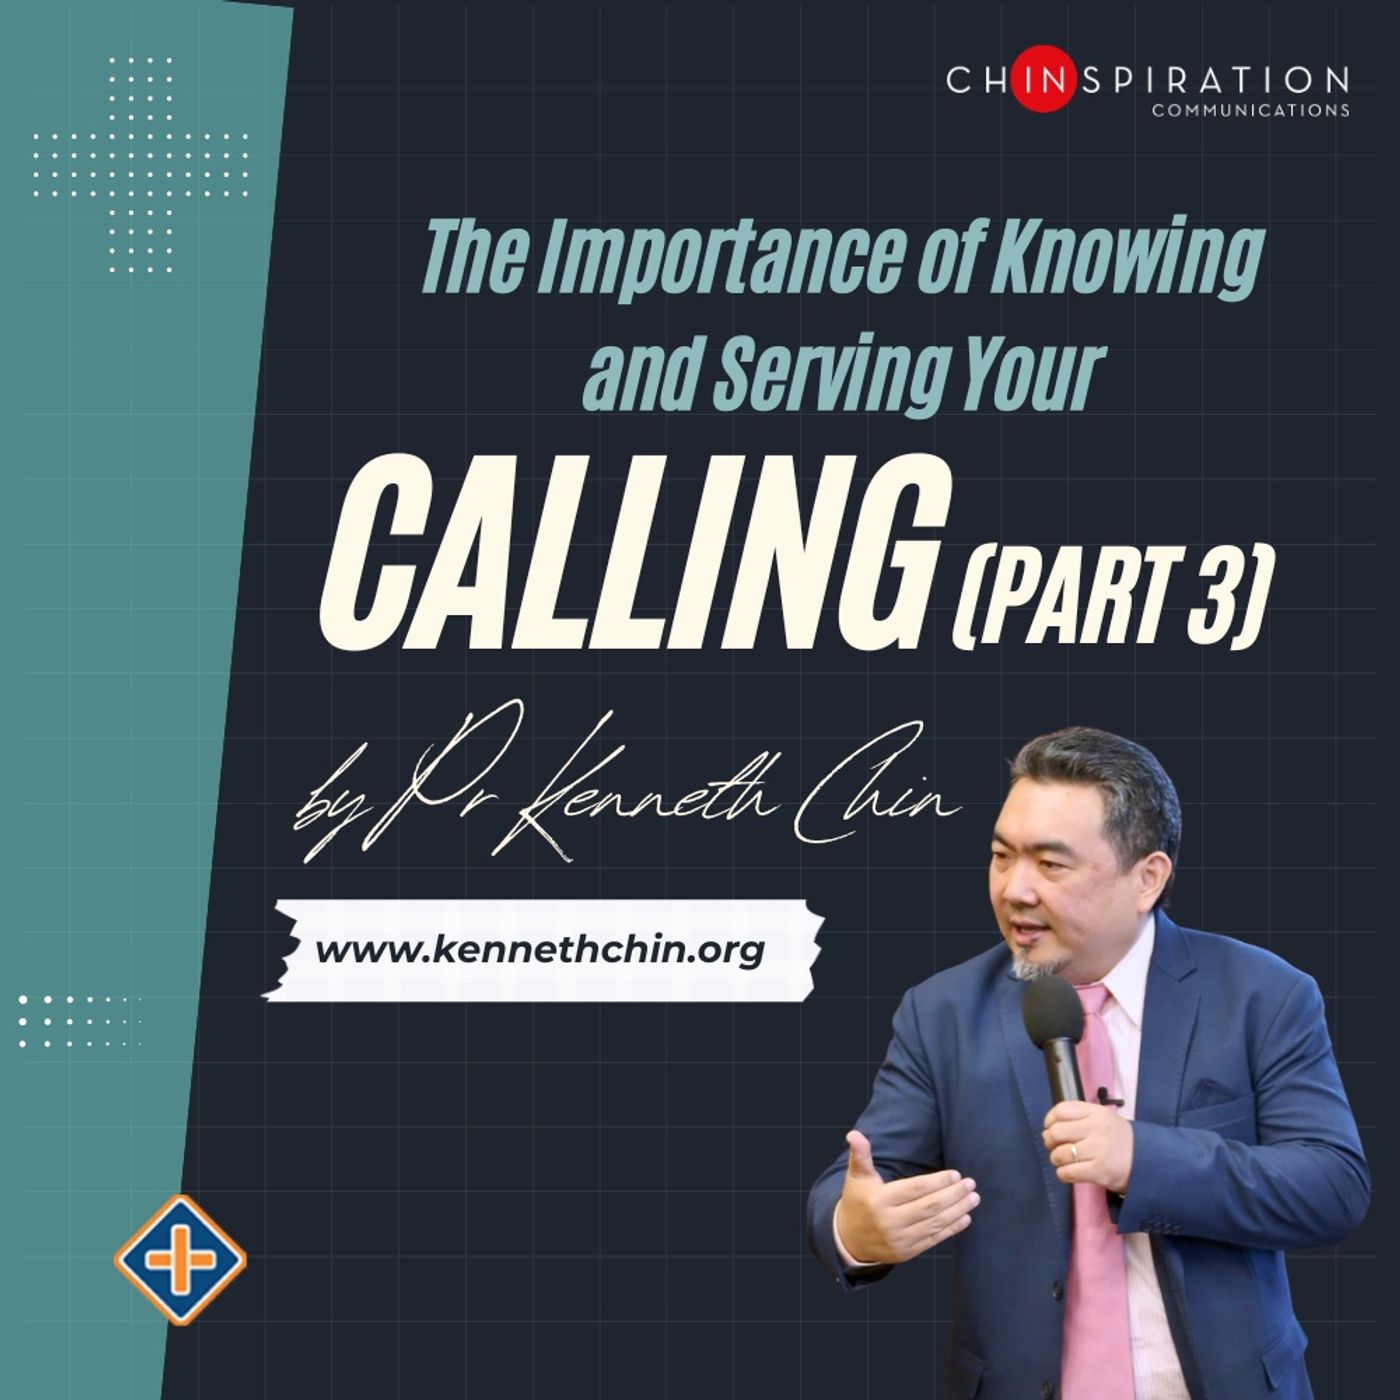 The Importance Of Knowing And Serving Your "CALLING" (Part 3): The 5 Needs for Calling to Thrive